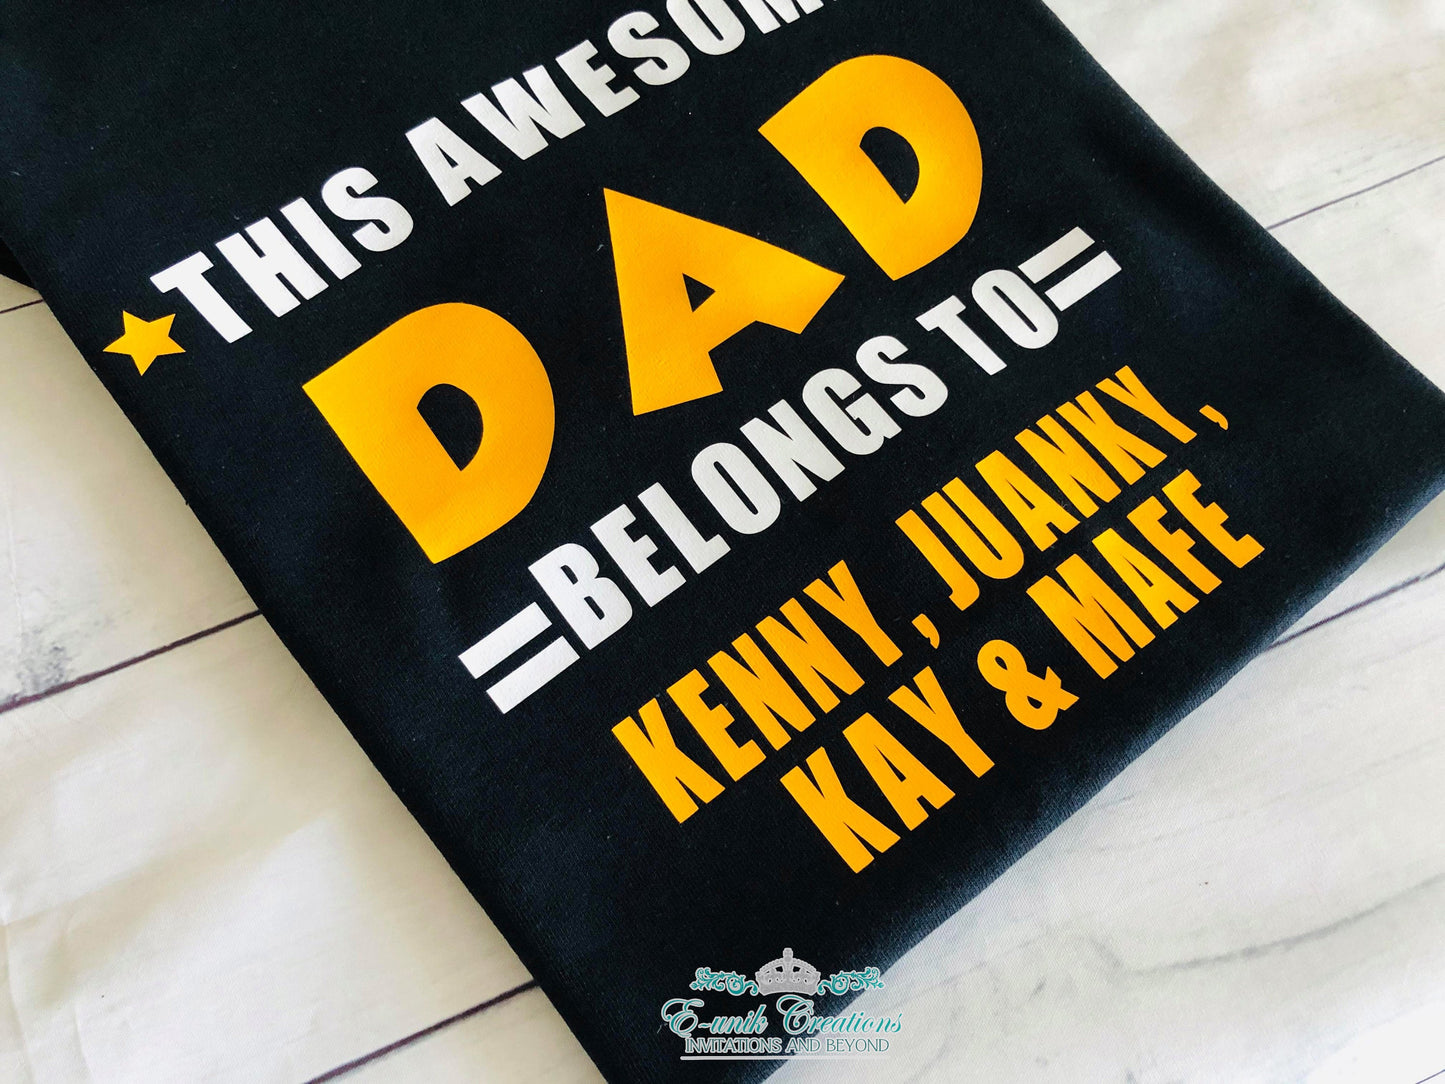 Father's Day Gift, Personalized T-shirt This Awesome Dad Belongs To